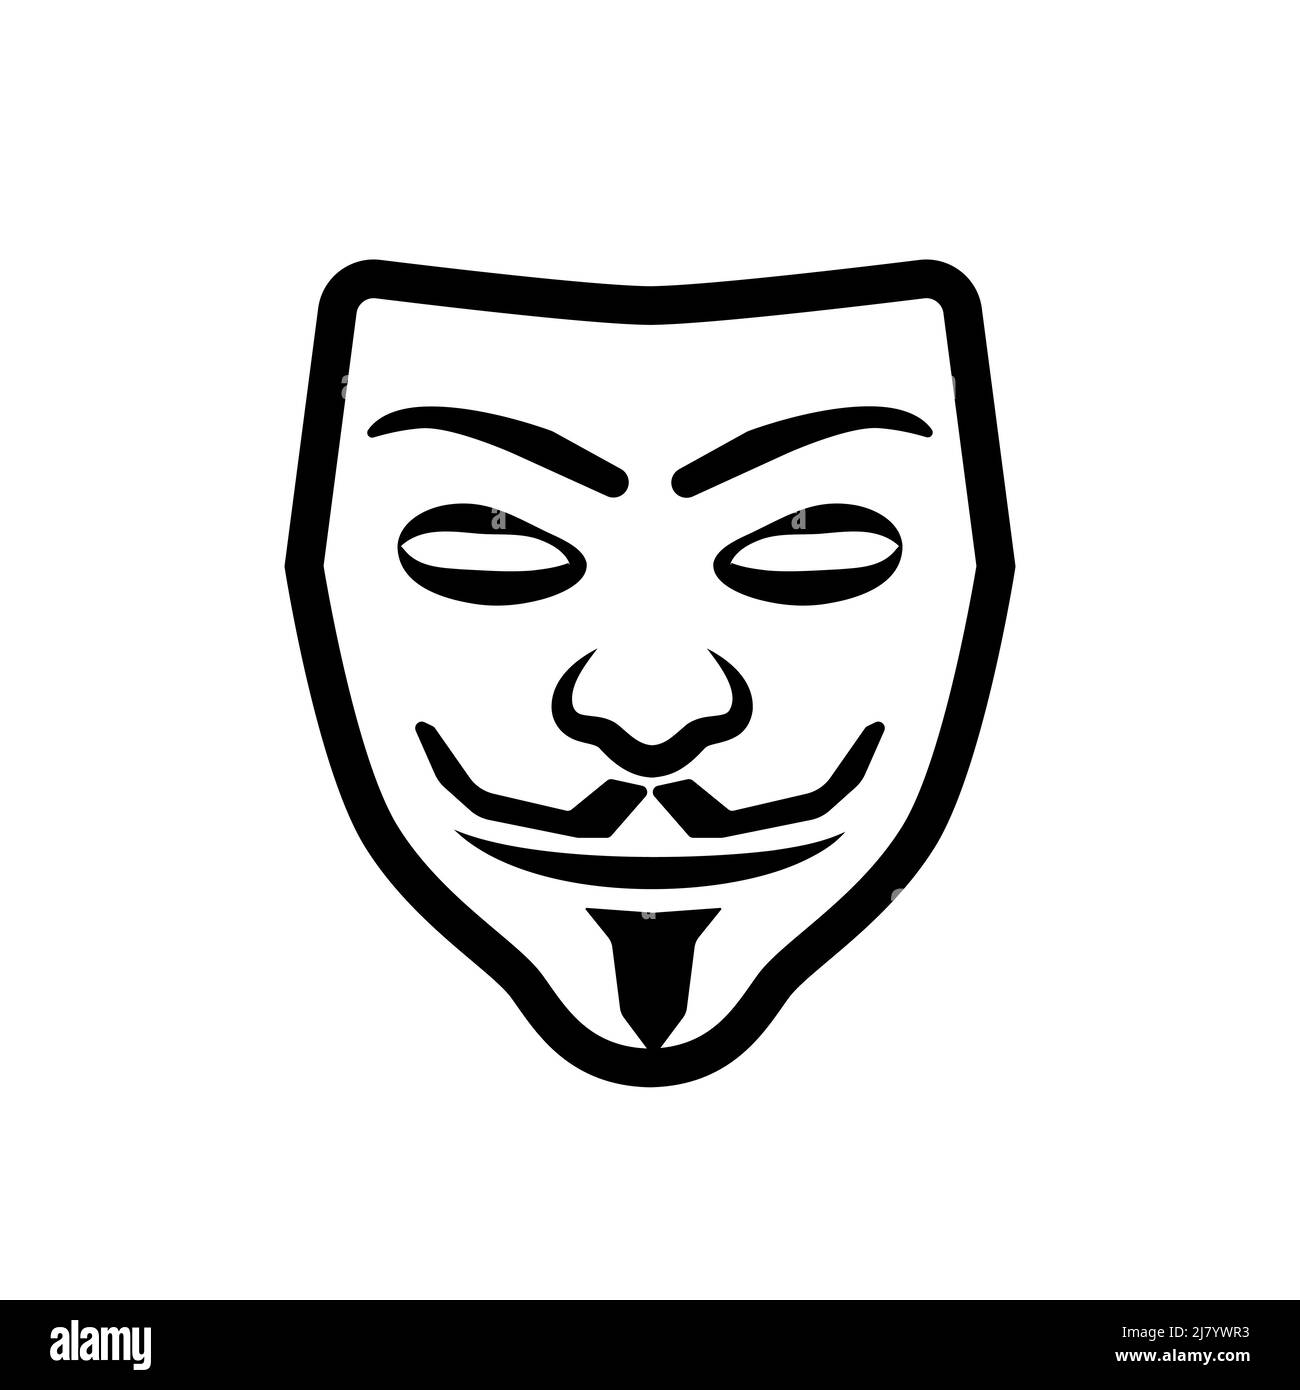 V for vendetta mask Cut Out Stock Images & Pictures - Alamy